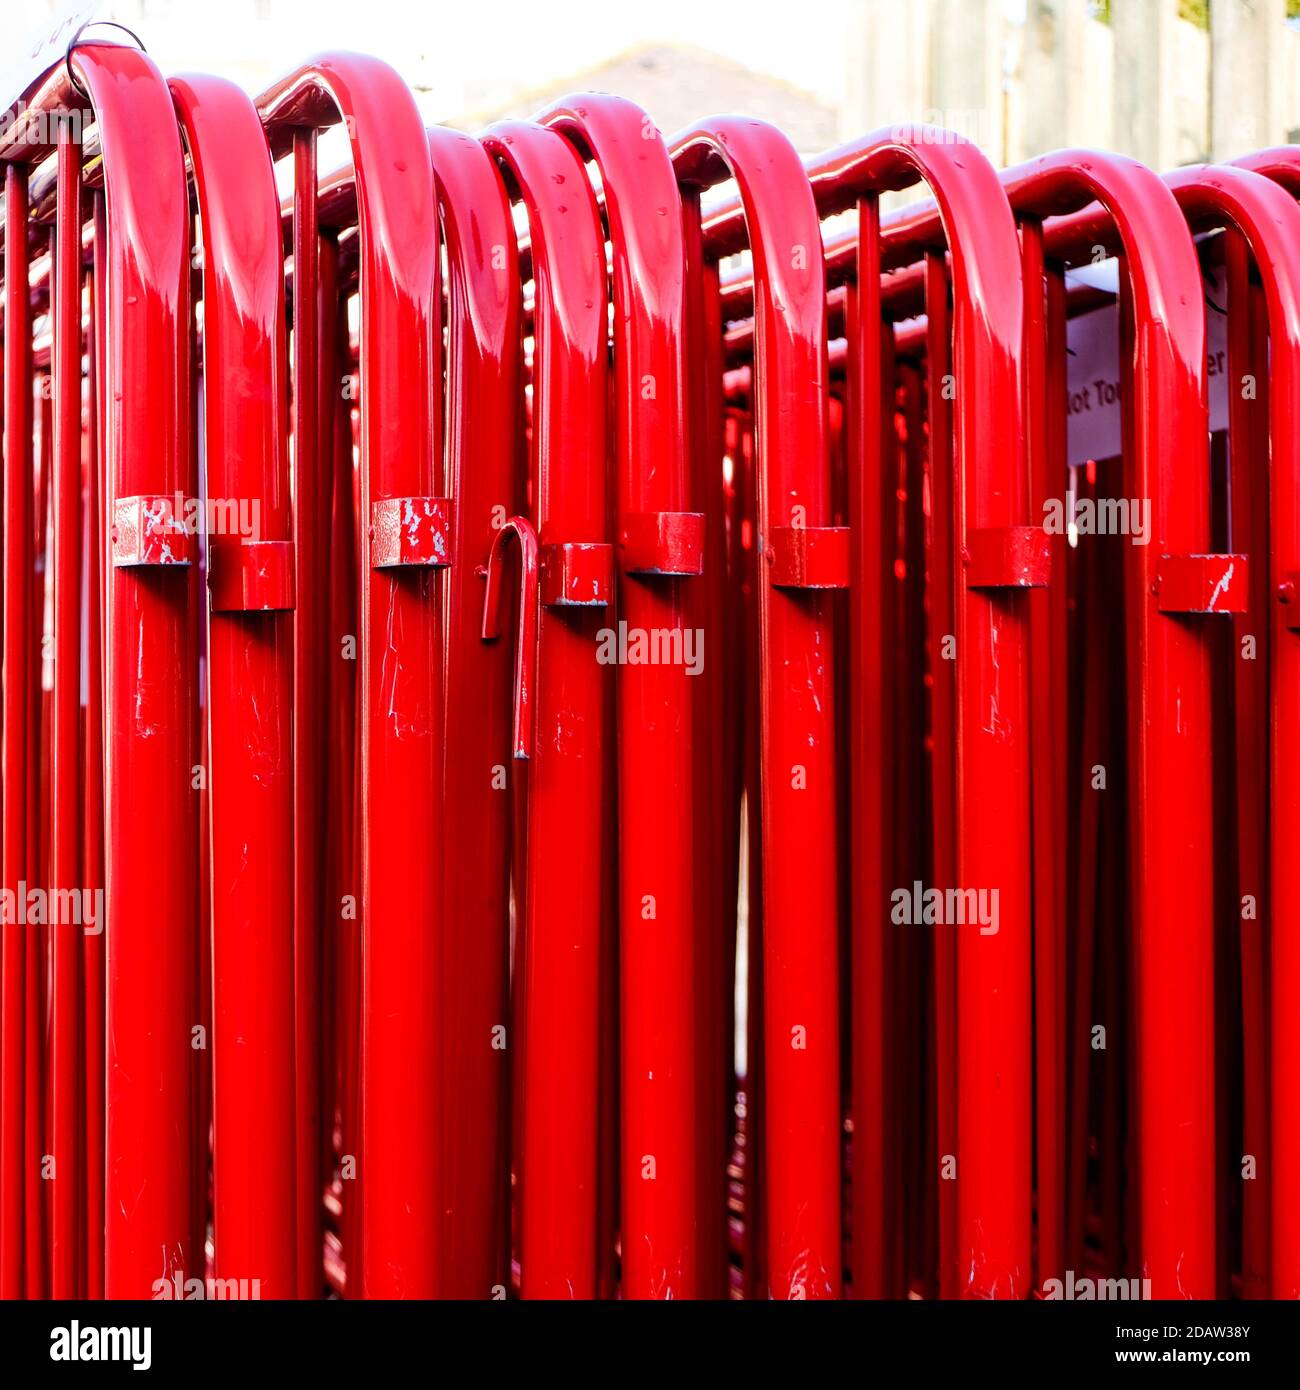 London UK, November 15 2020, A Group Of Stored Red Construction Safety Crowd Control Barriers During COVID-19 Coronavirus Lockdown Stock Photo